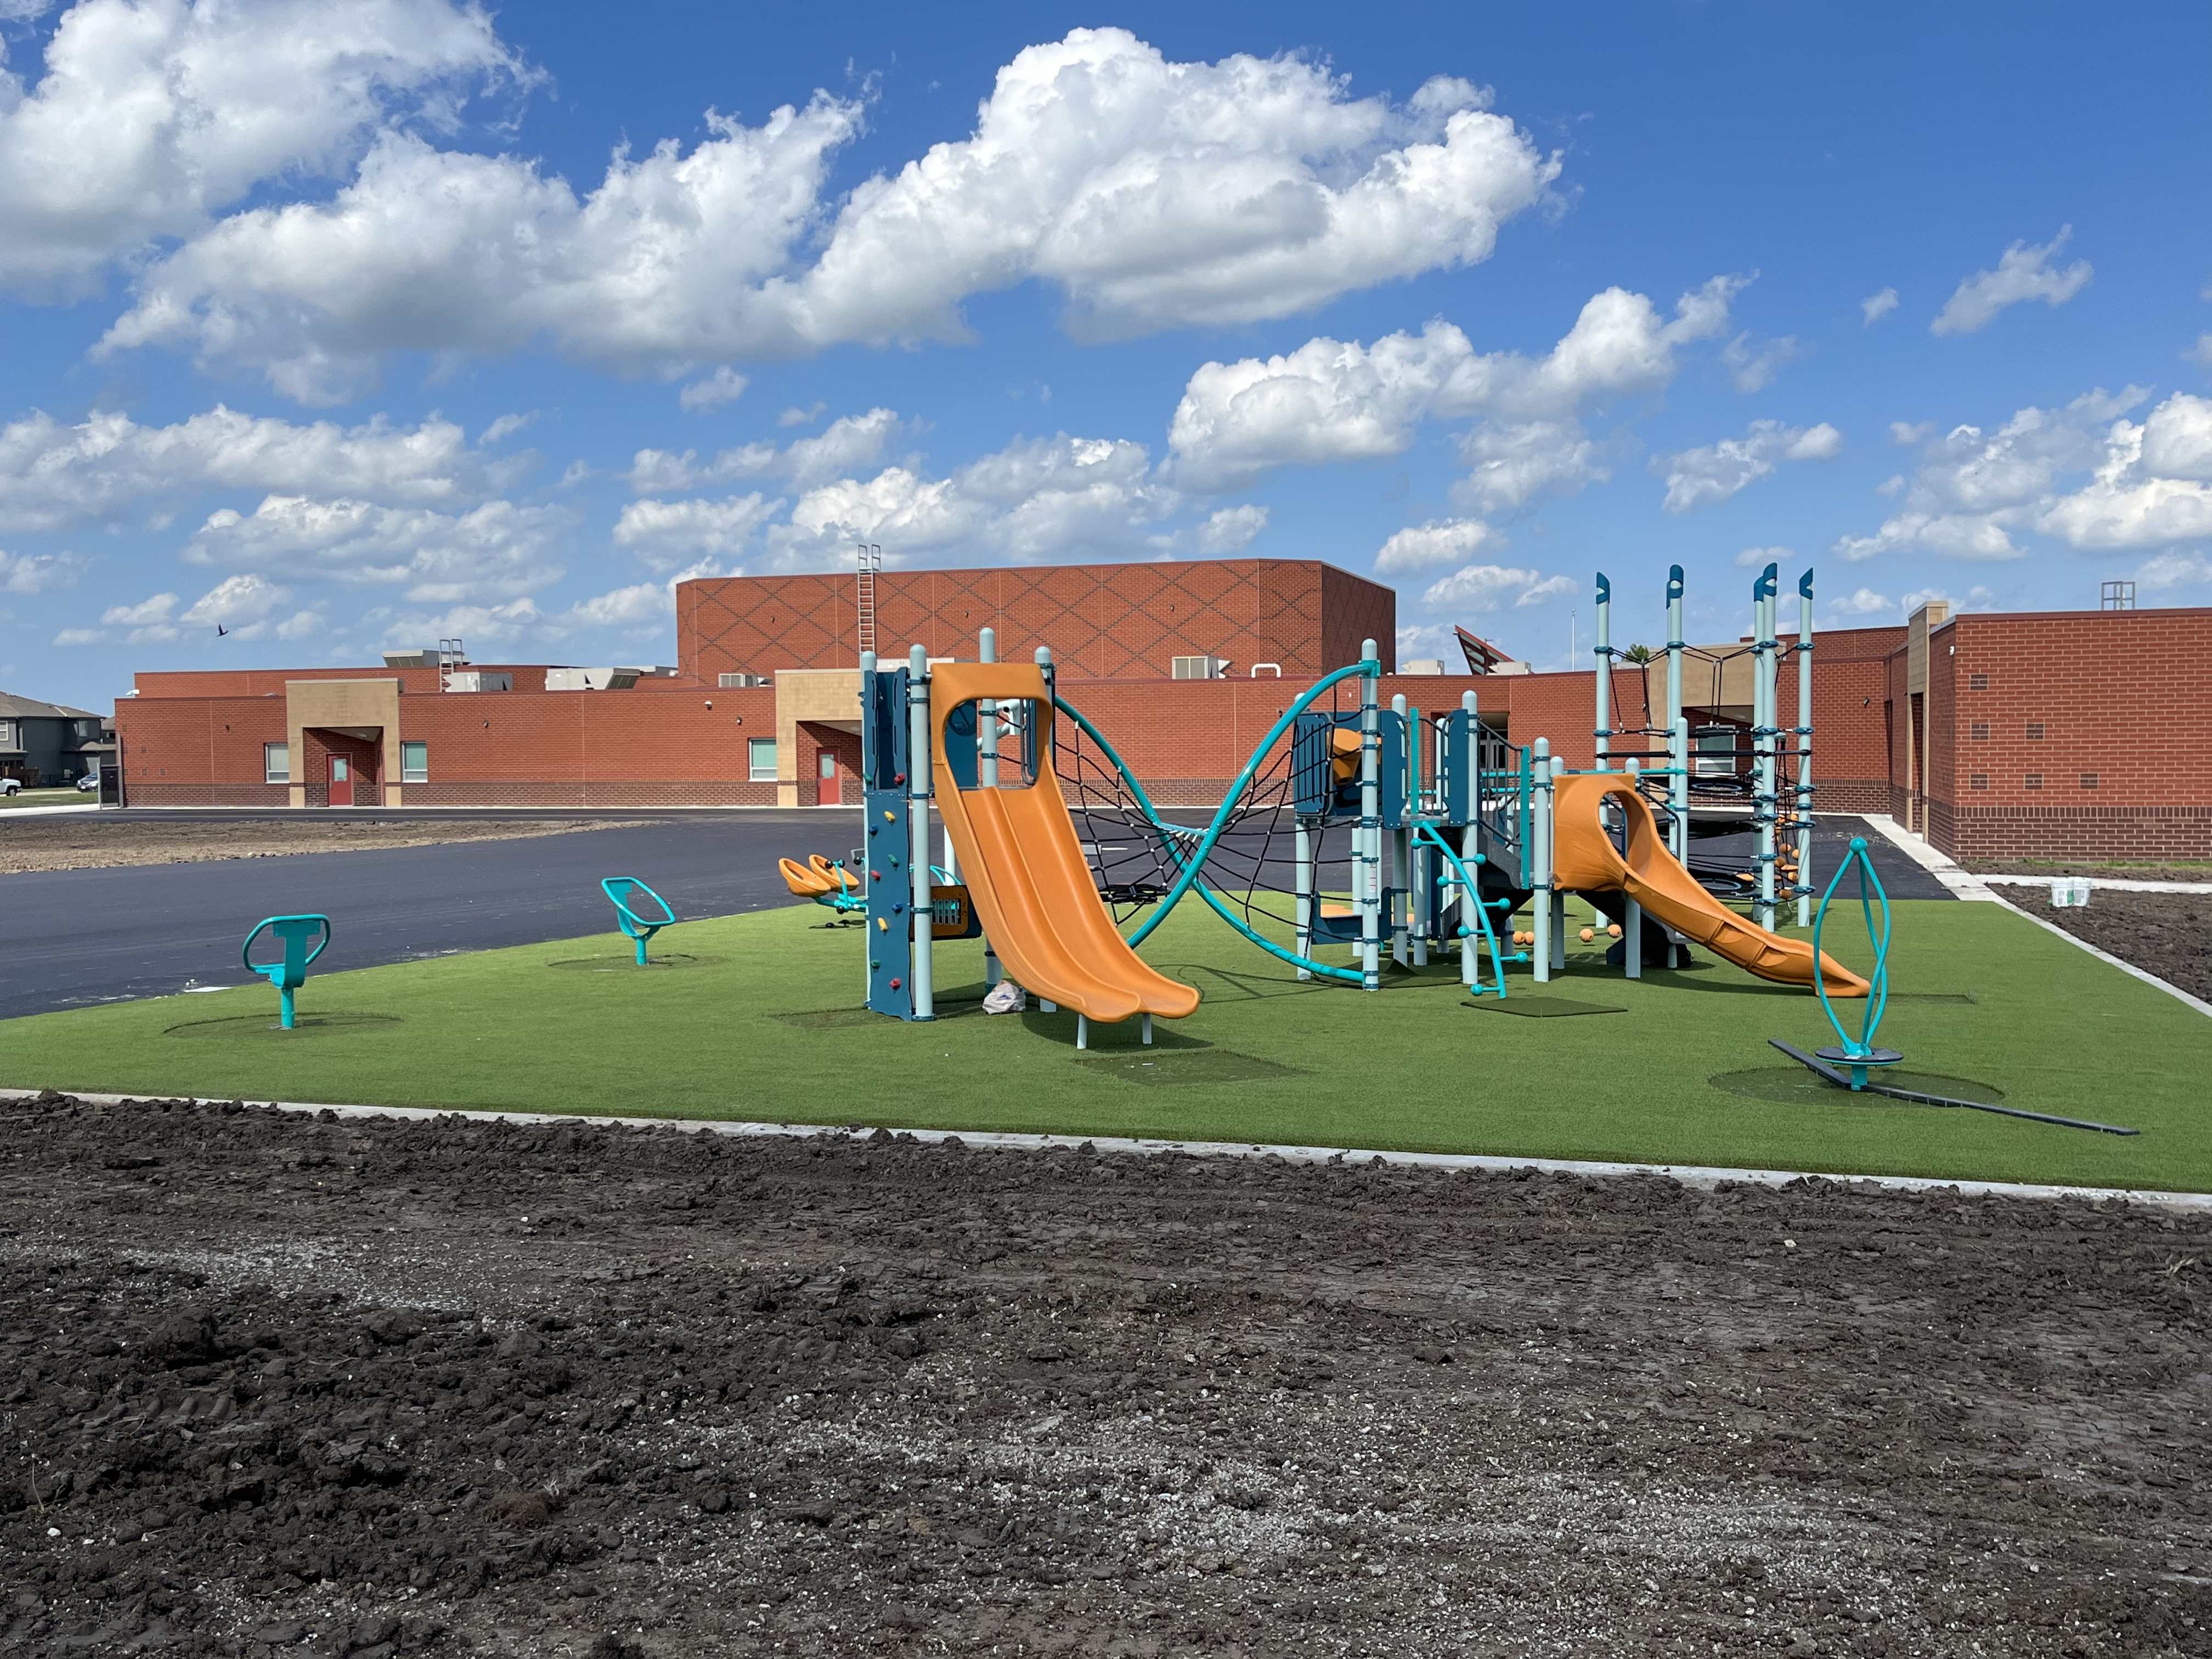 Our new playground is looking good!  Almost complete